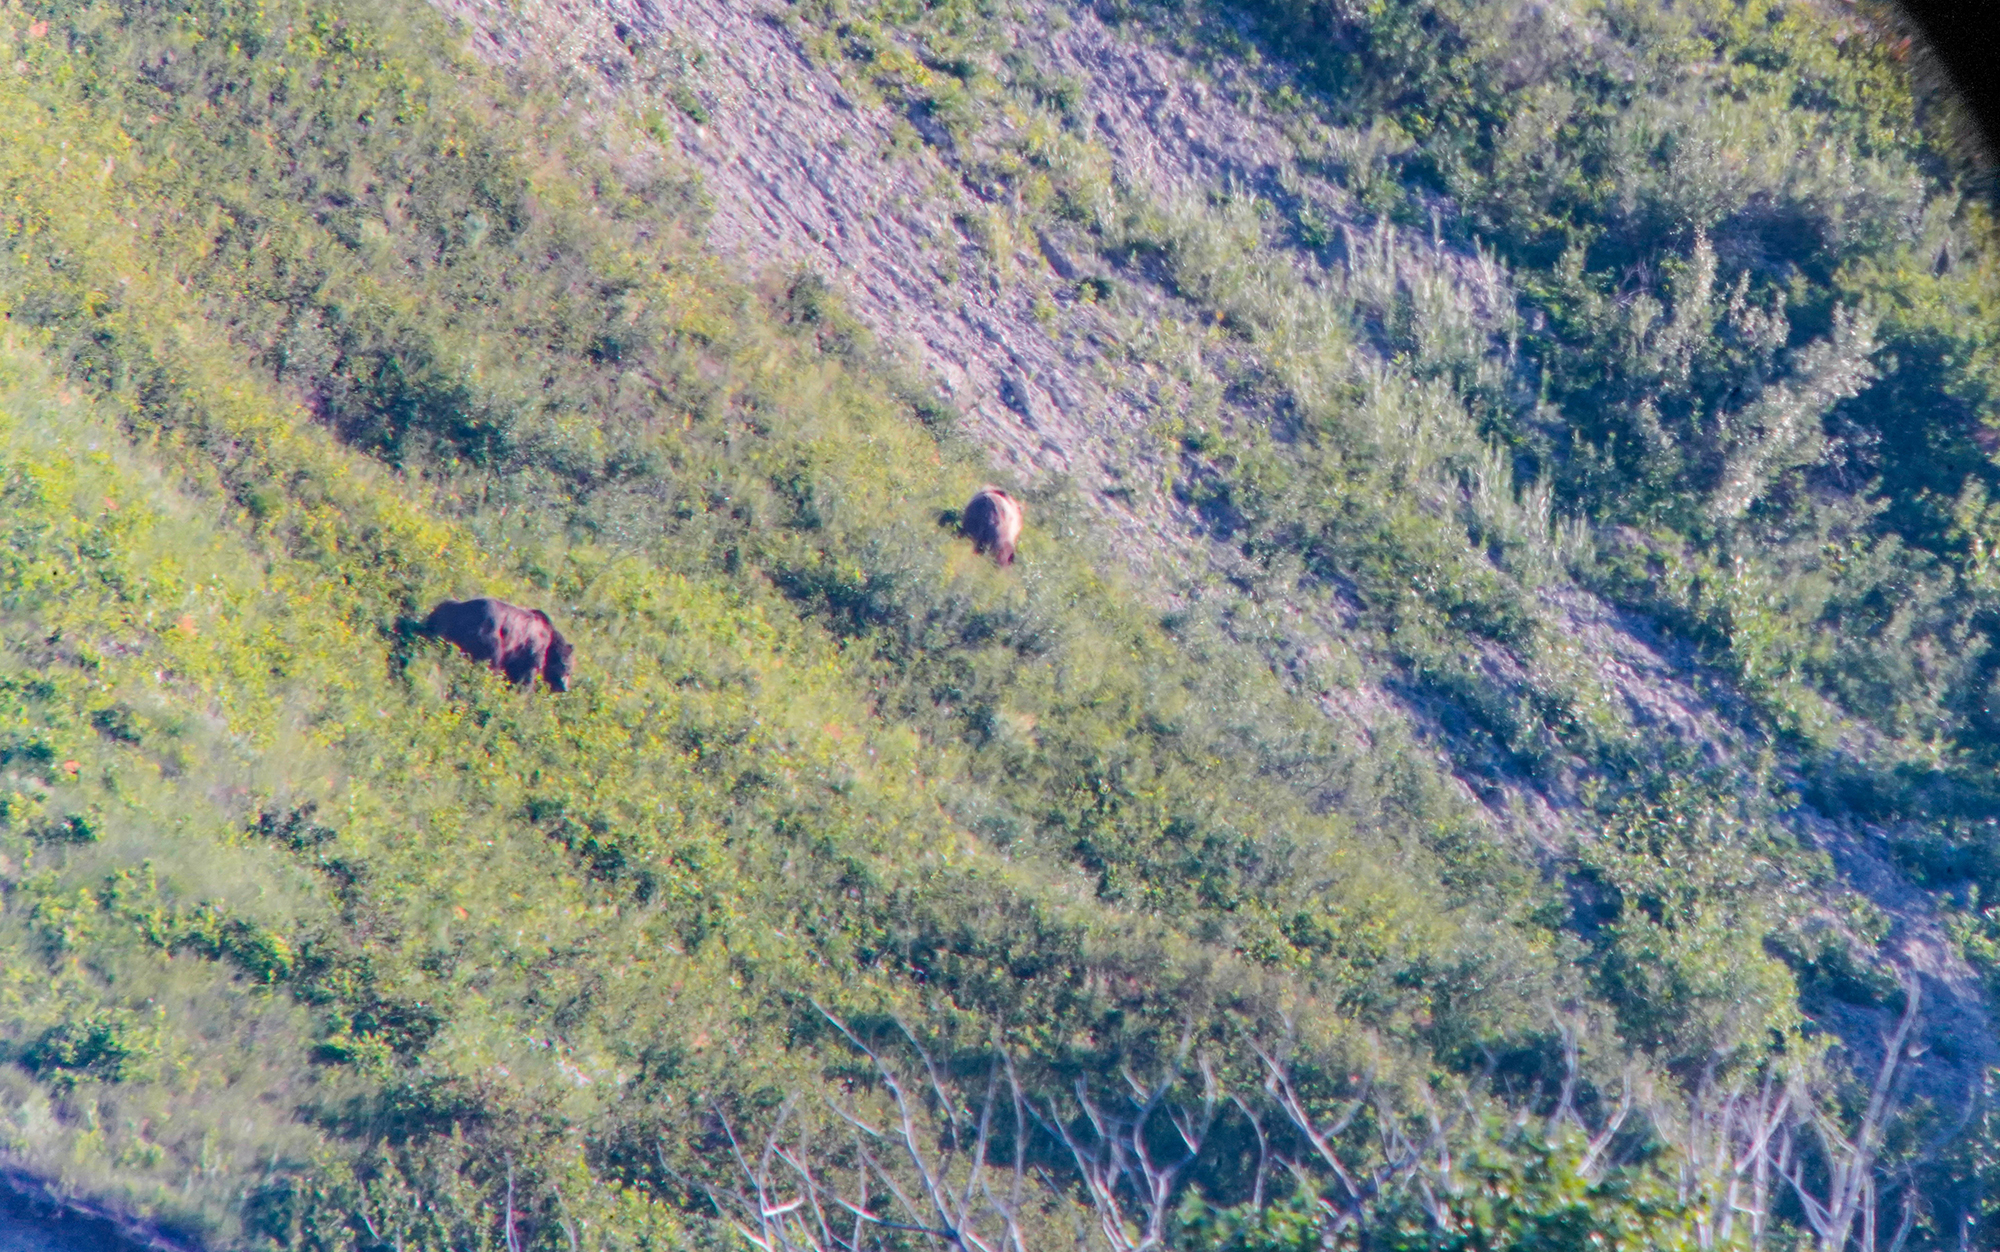 Spotted bears during spotting scope test.